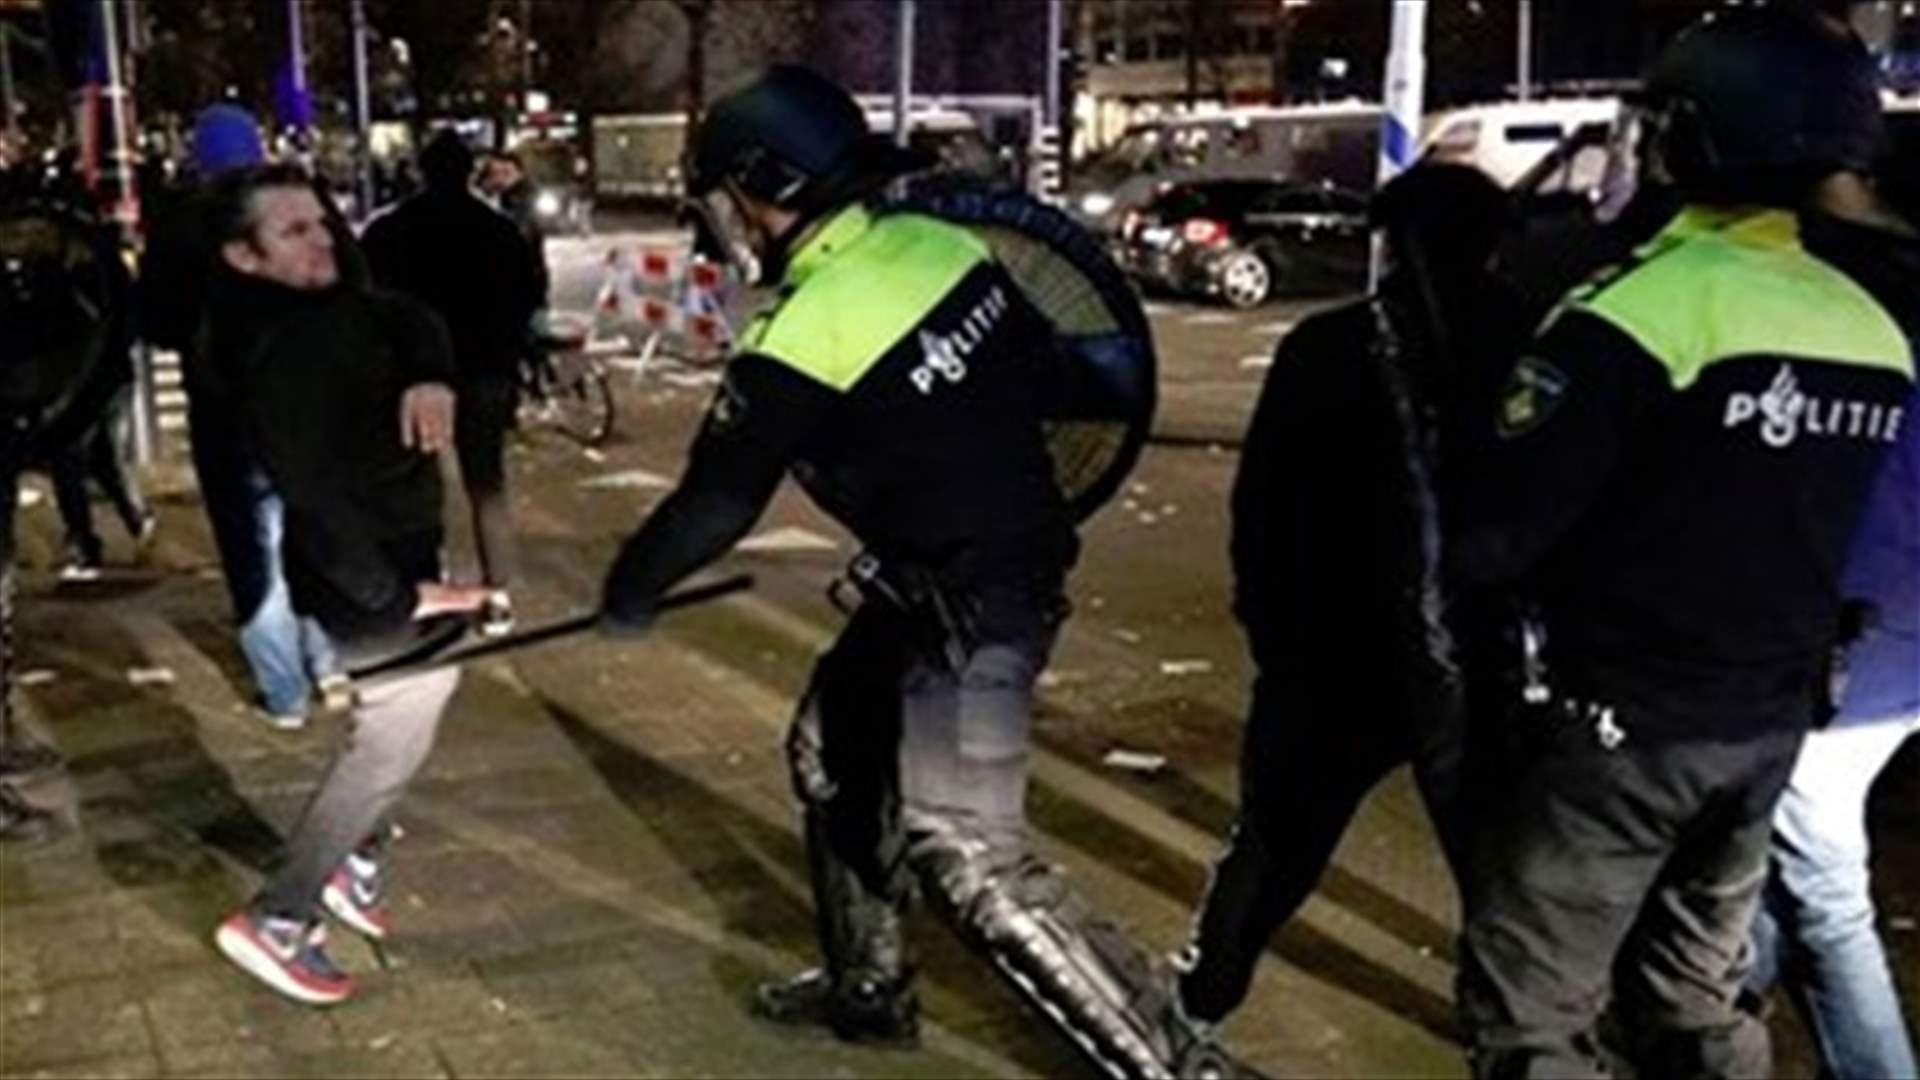 Turkey summons Dutch envoy to complain over Rotterdam police action -ministry sources